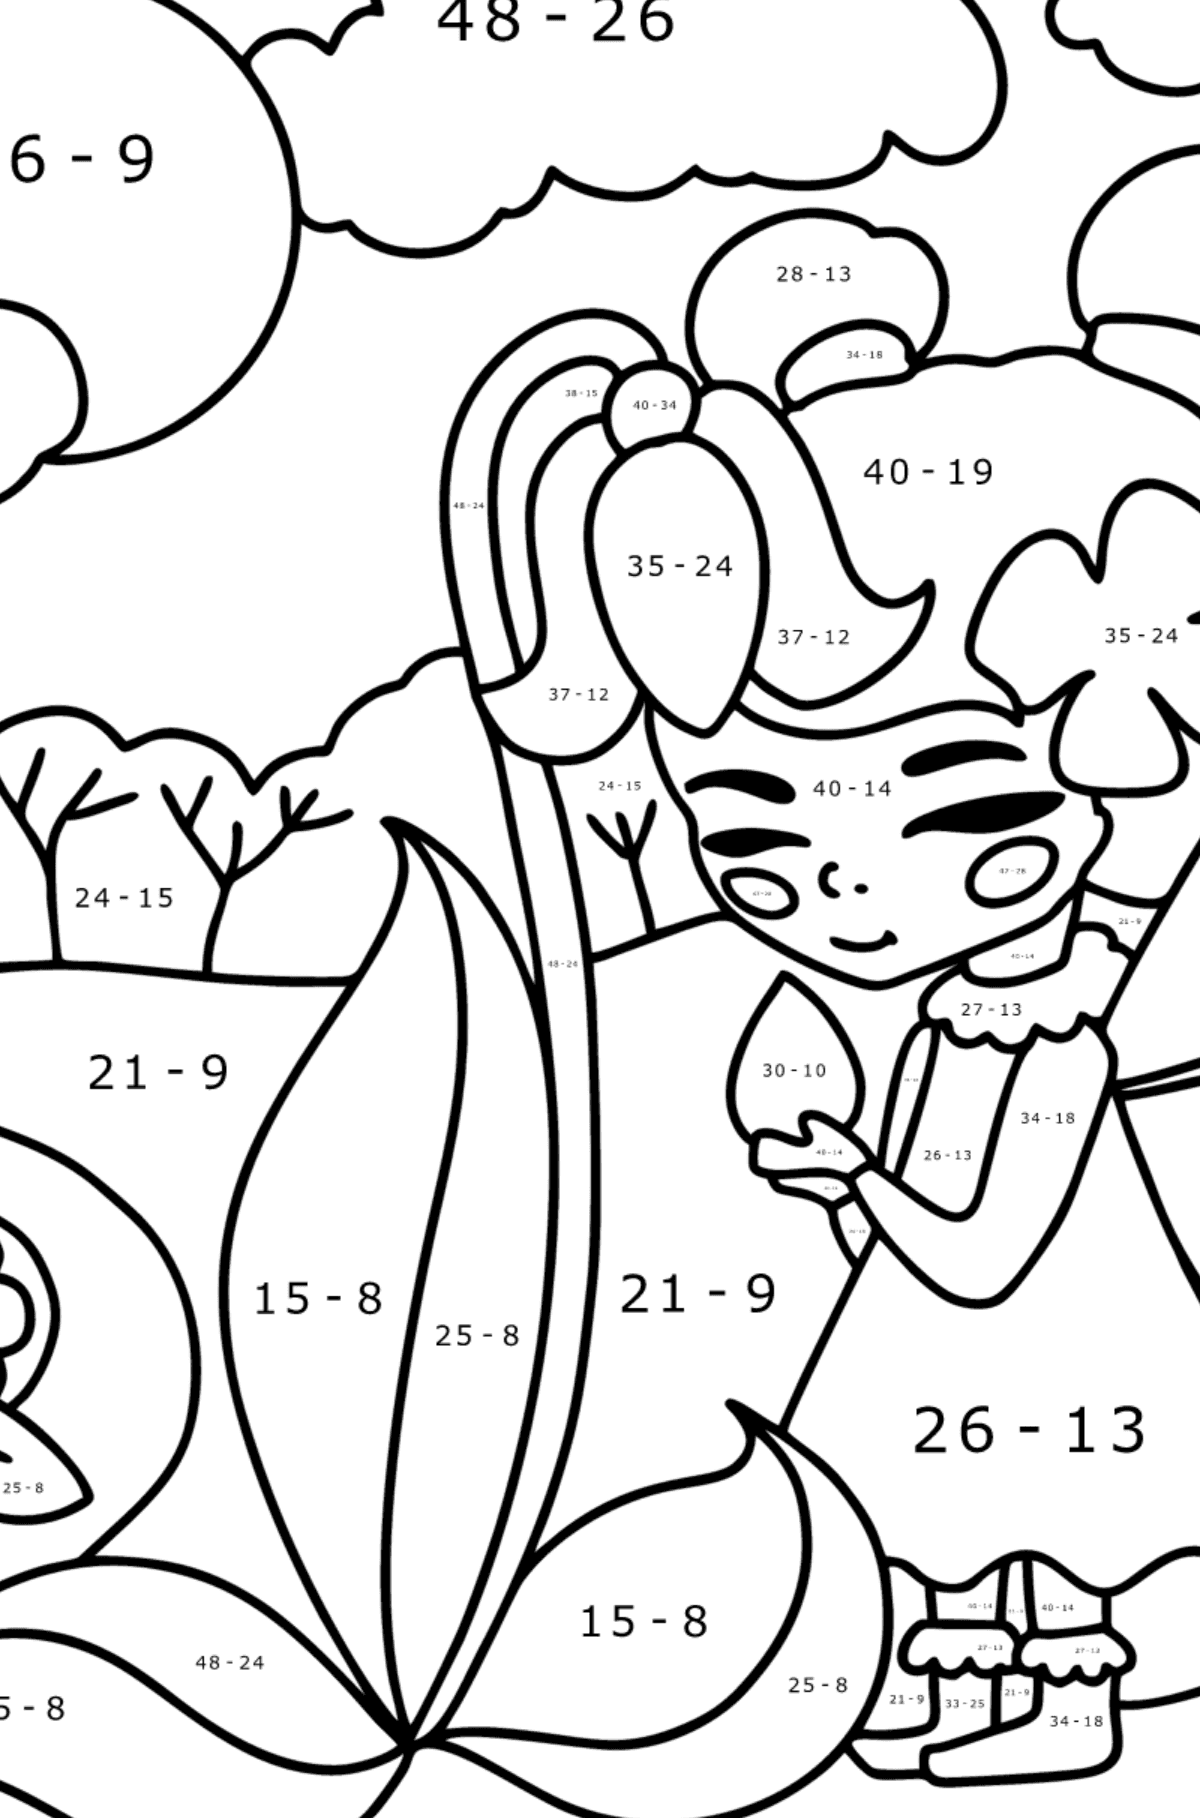 Fairy on a forest path coloring page - Math Coloring - Subtraction for Kids